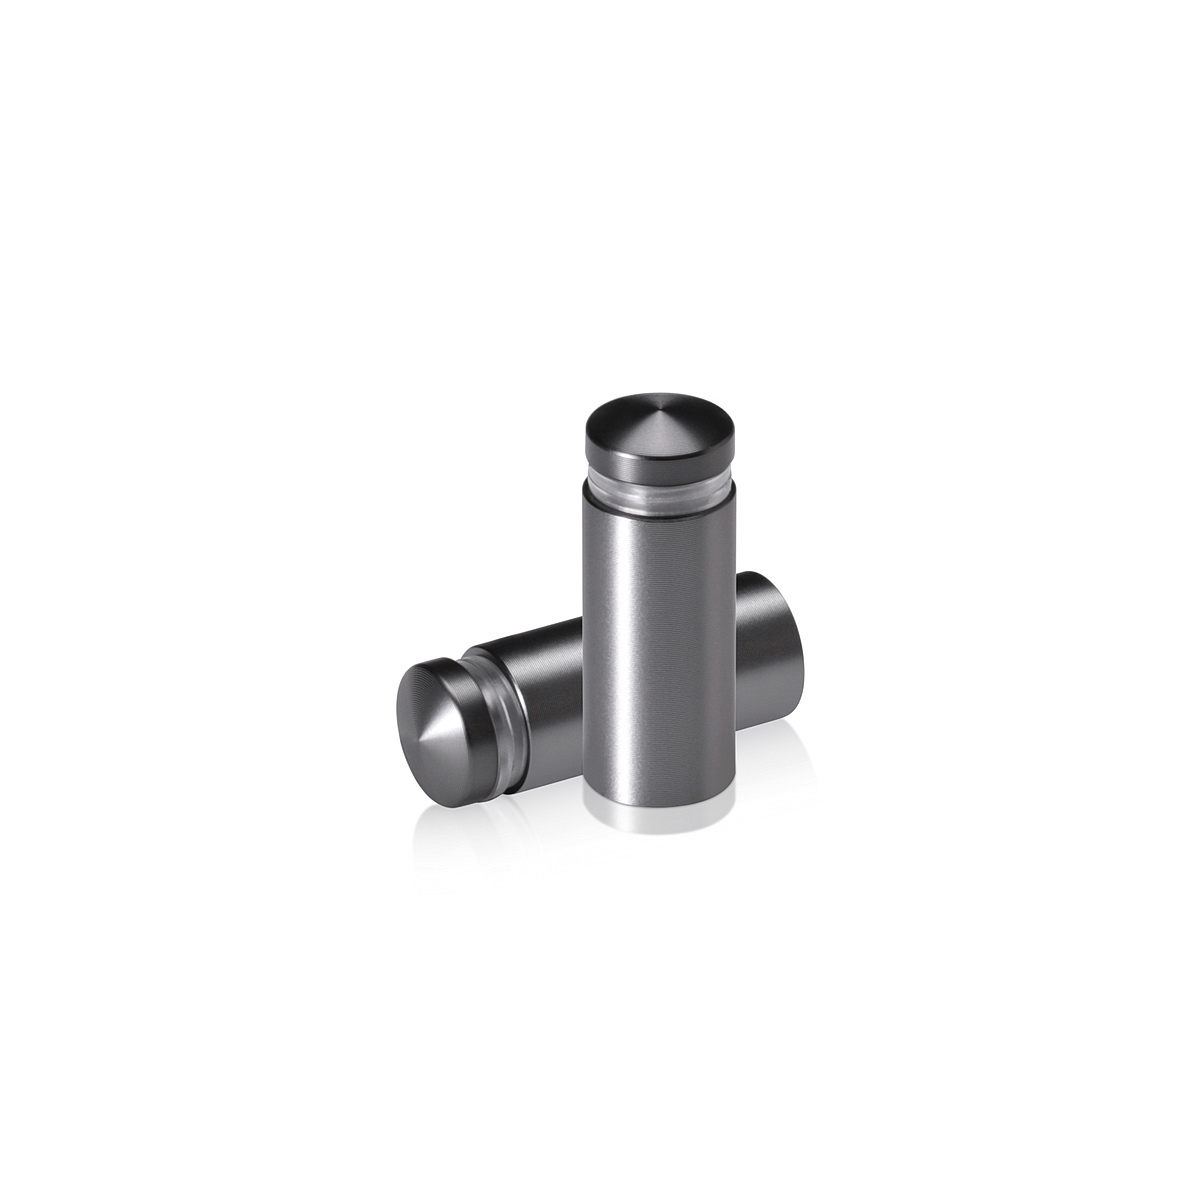 1/2'' Diameter X 1'' Barrel Length, Aluminum Rounded Head Standoffs, Titanium Anodized Finish Easy Fasten Standoff (For Inside / Outside use) [Required Material Hole Size: 3/8'']